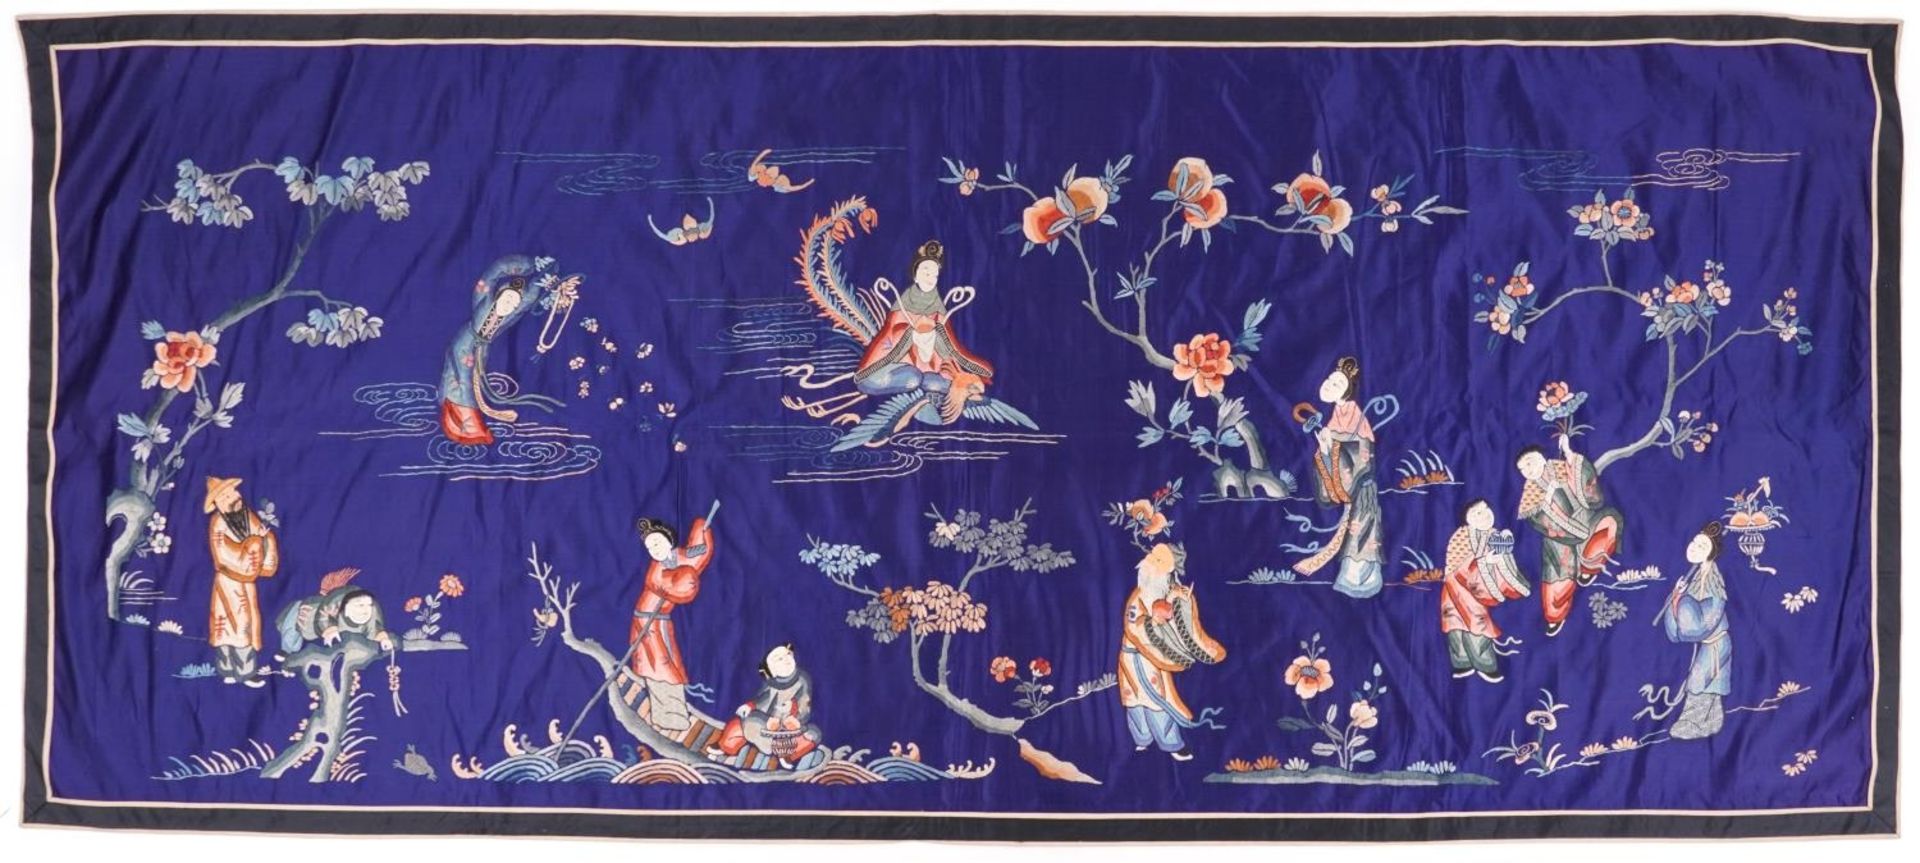 Large Chinese silk textile embroidered with an emperor amongst Geishas and figures, one riding a